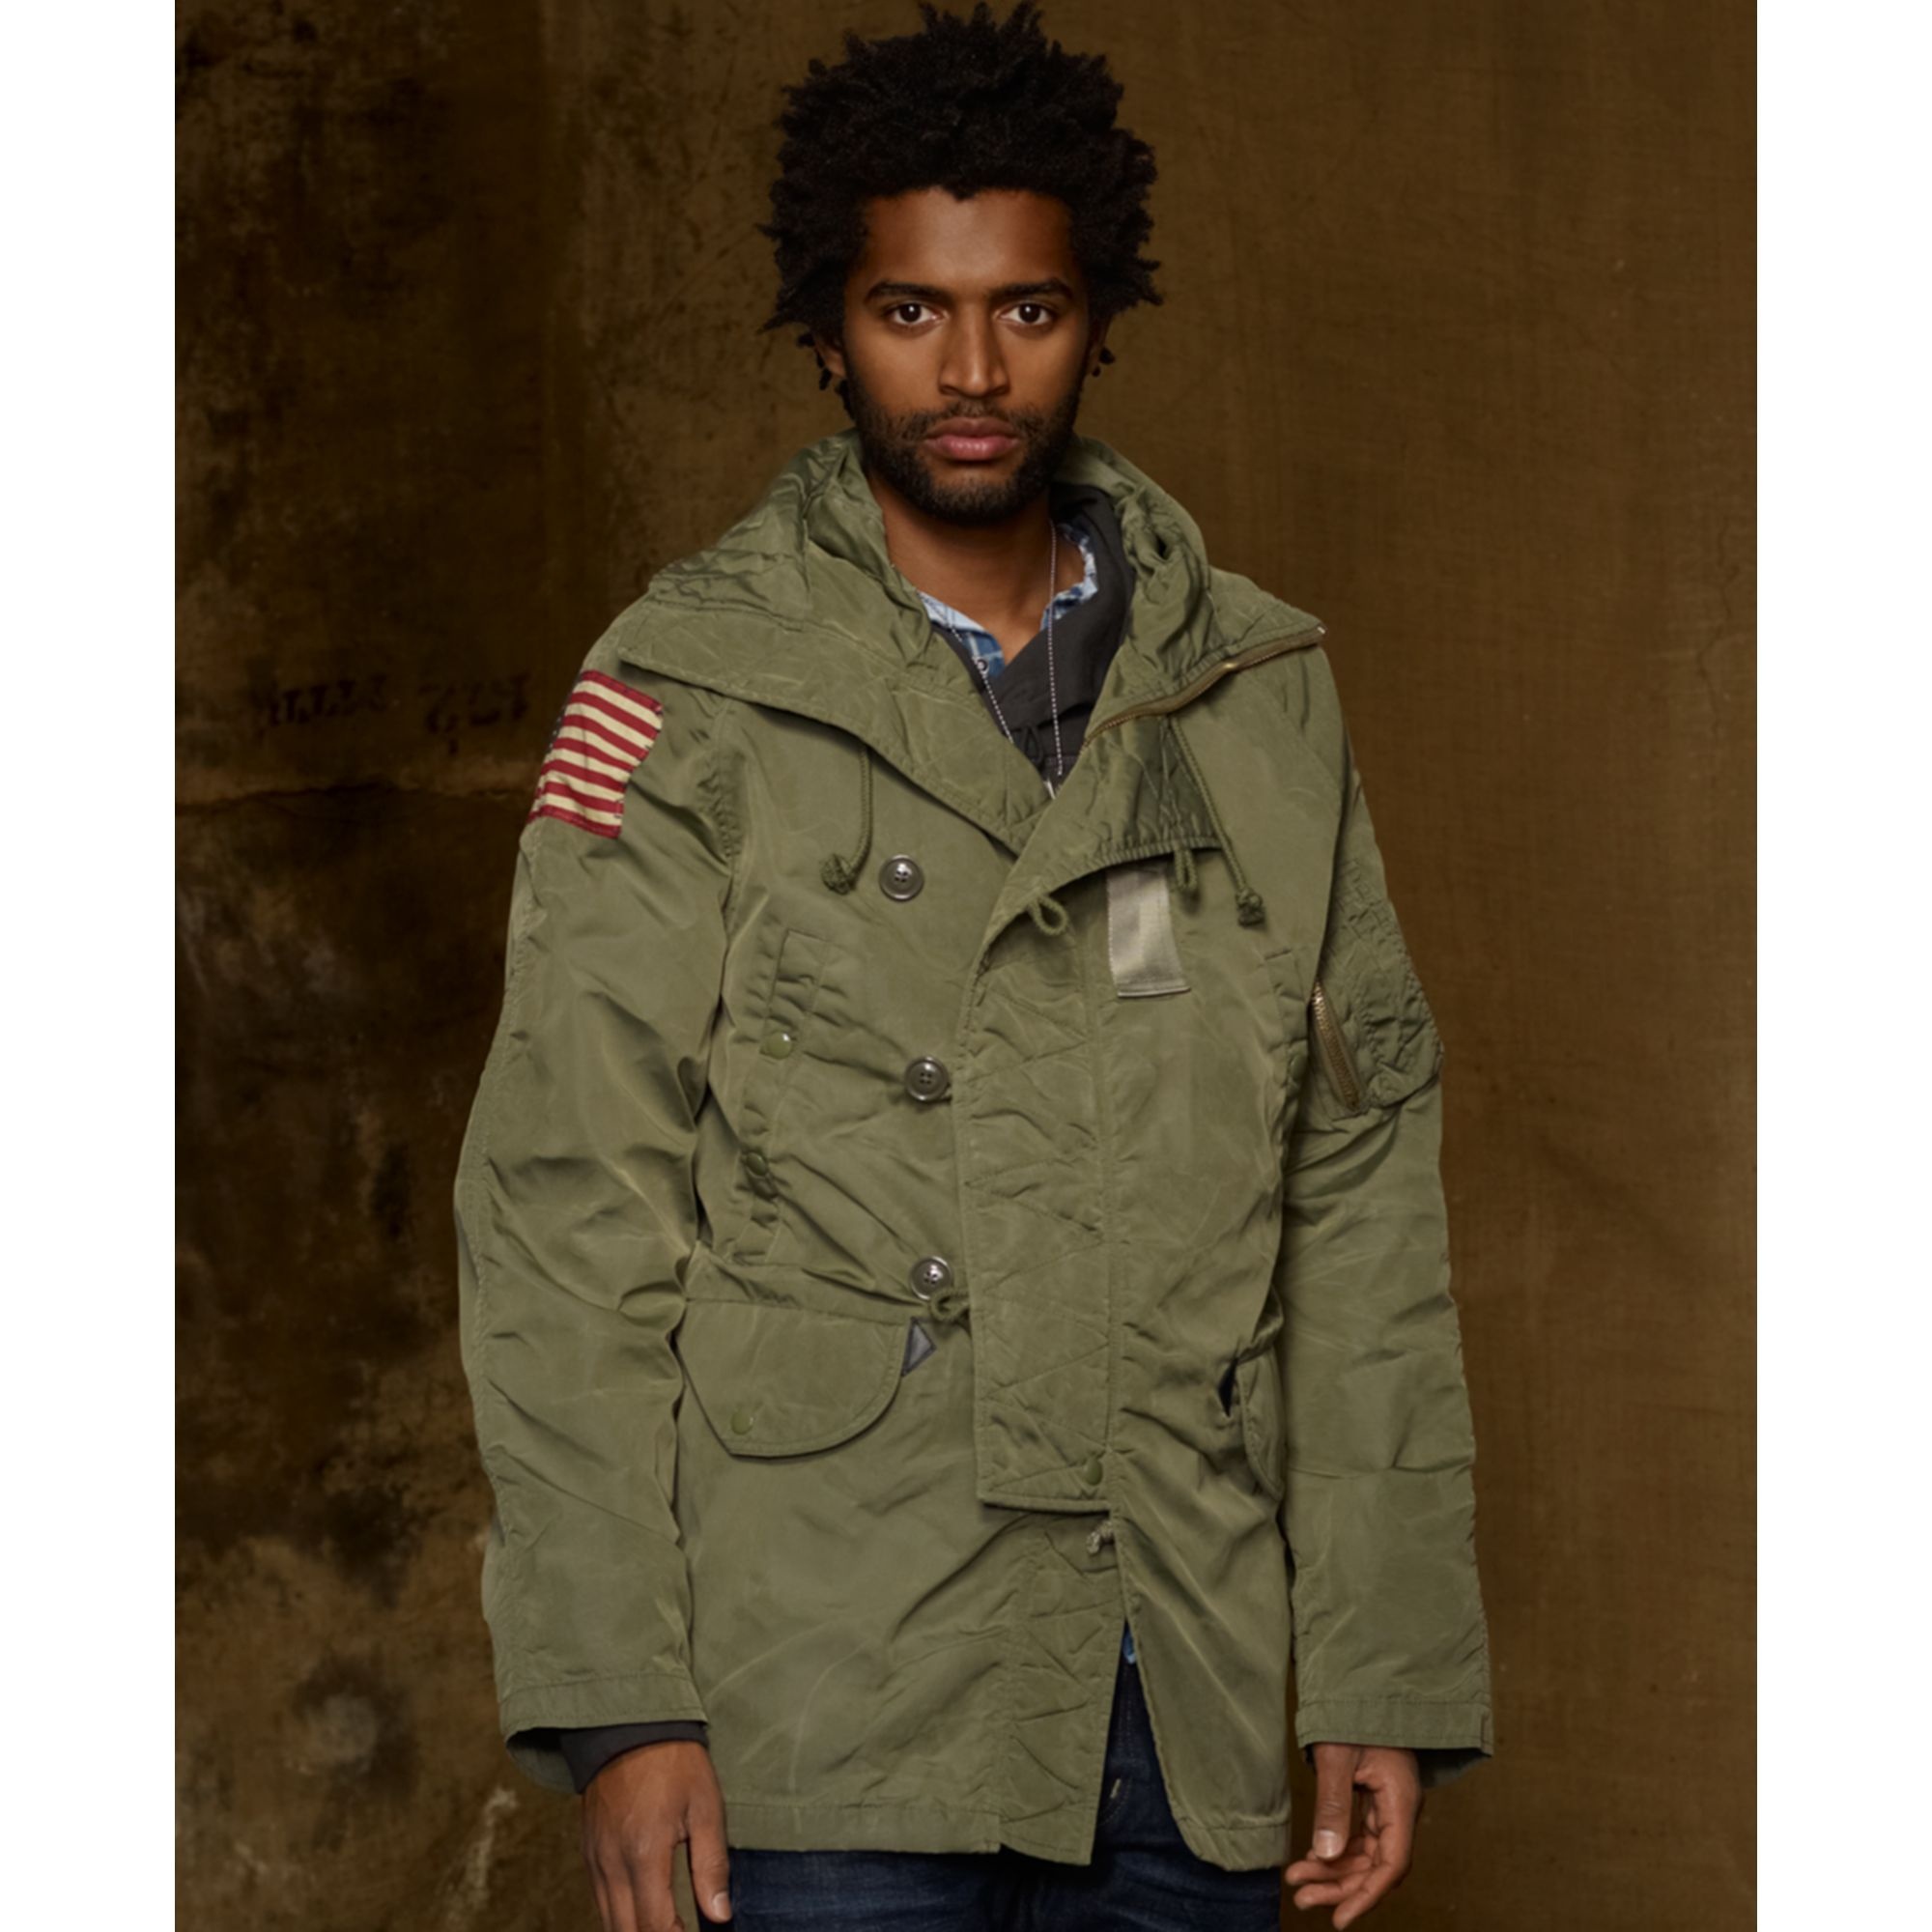 denim and supply military jacket mens Shop Clothing & Shoes Online